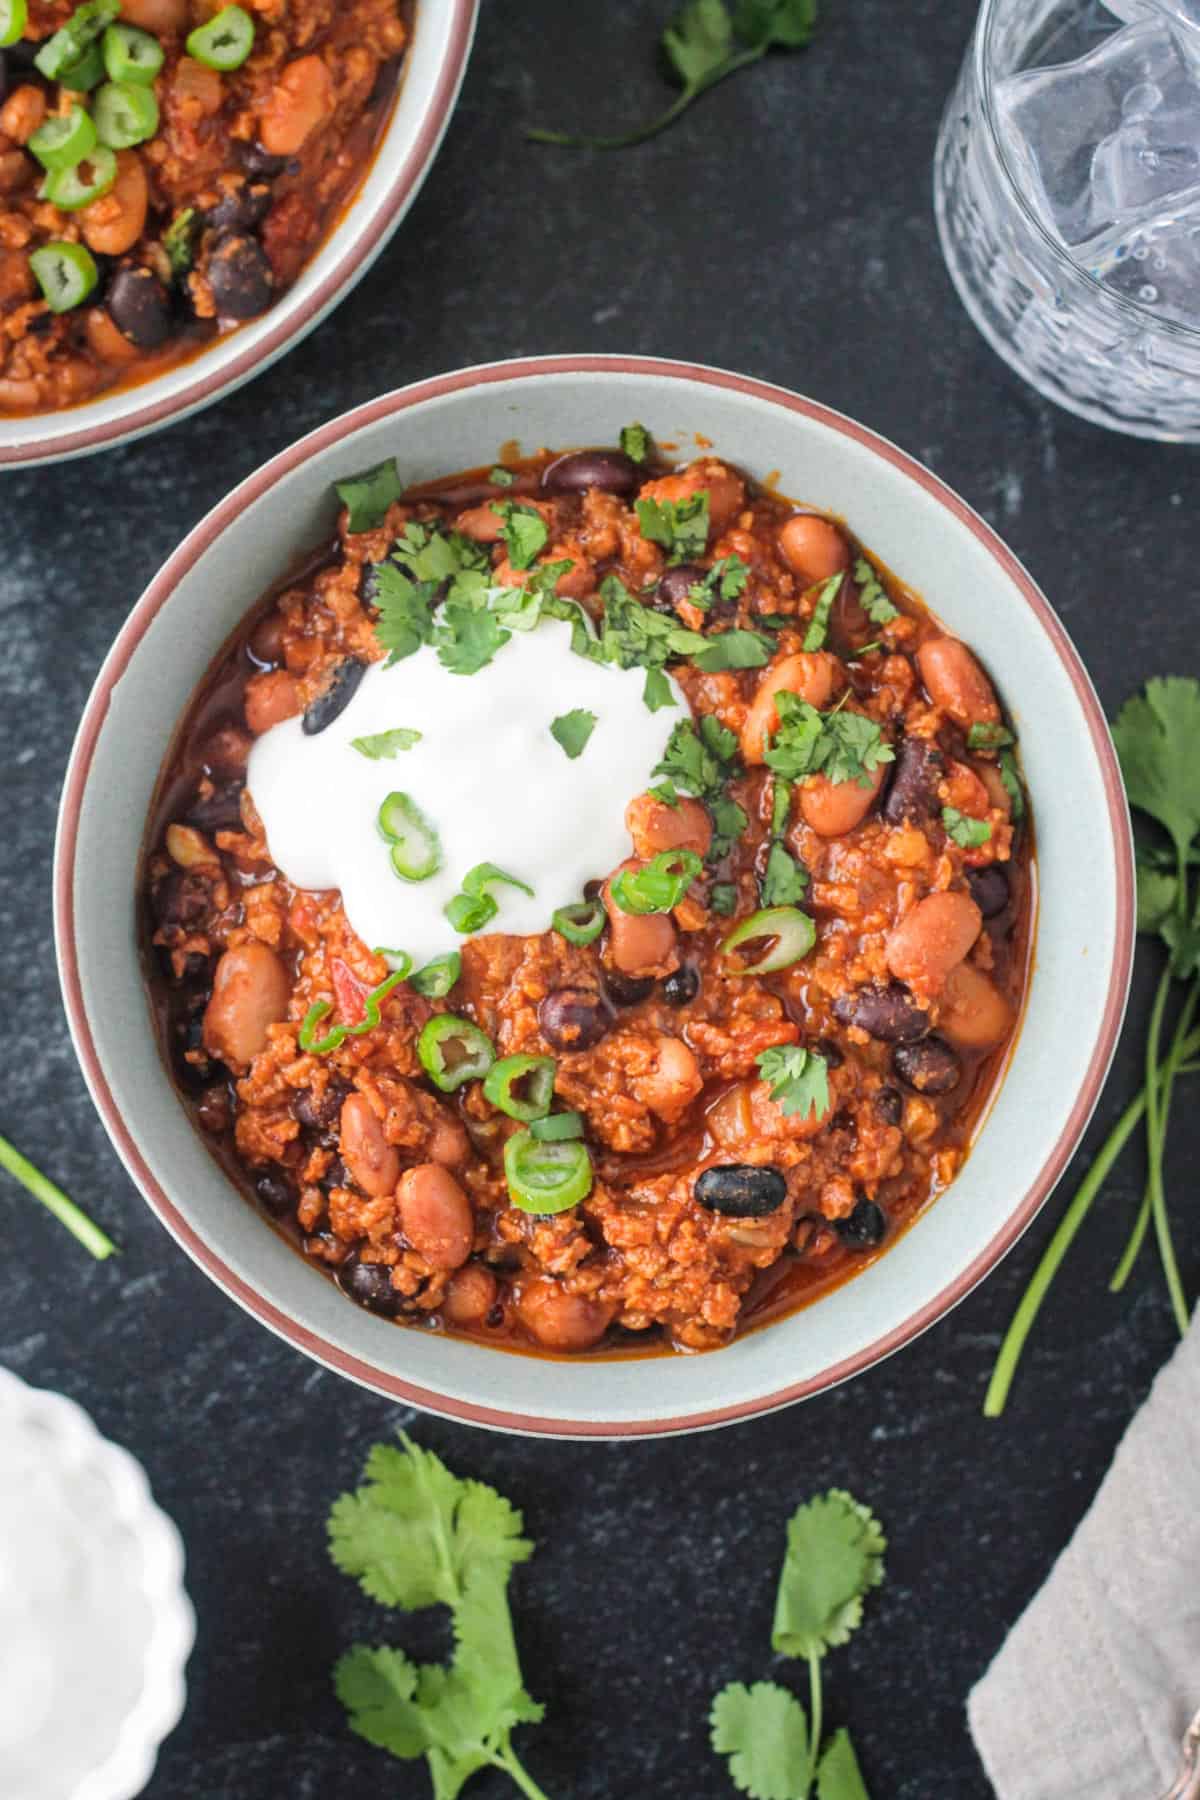 Vegan chorizo chili in a bowl with a dollop of sour cream and green onions.